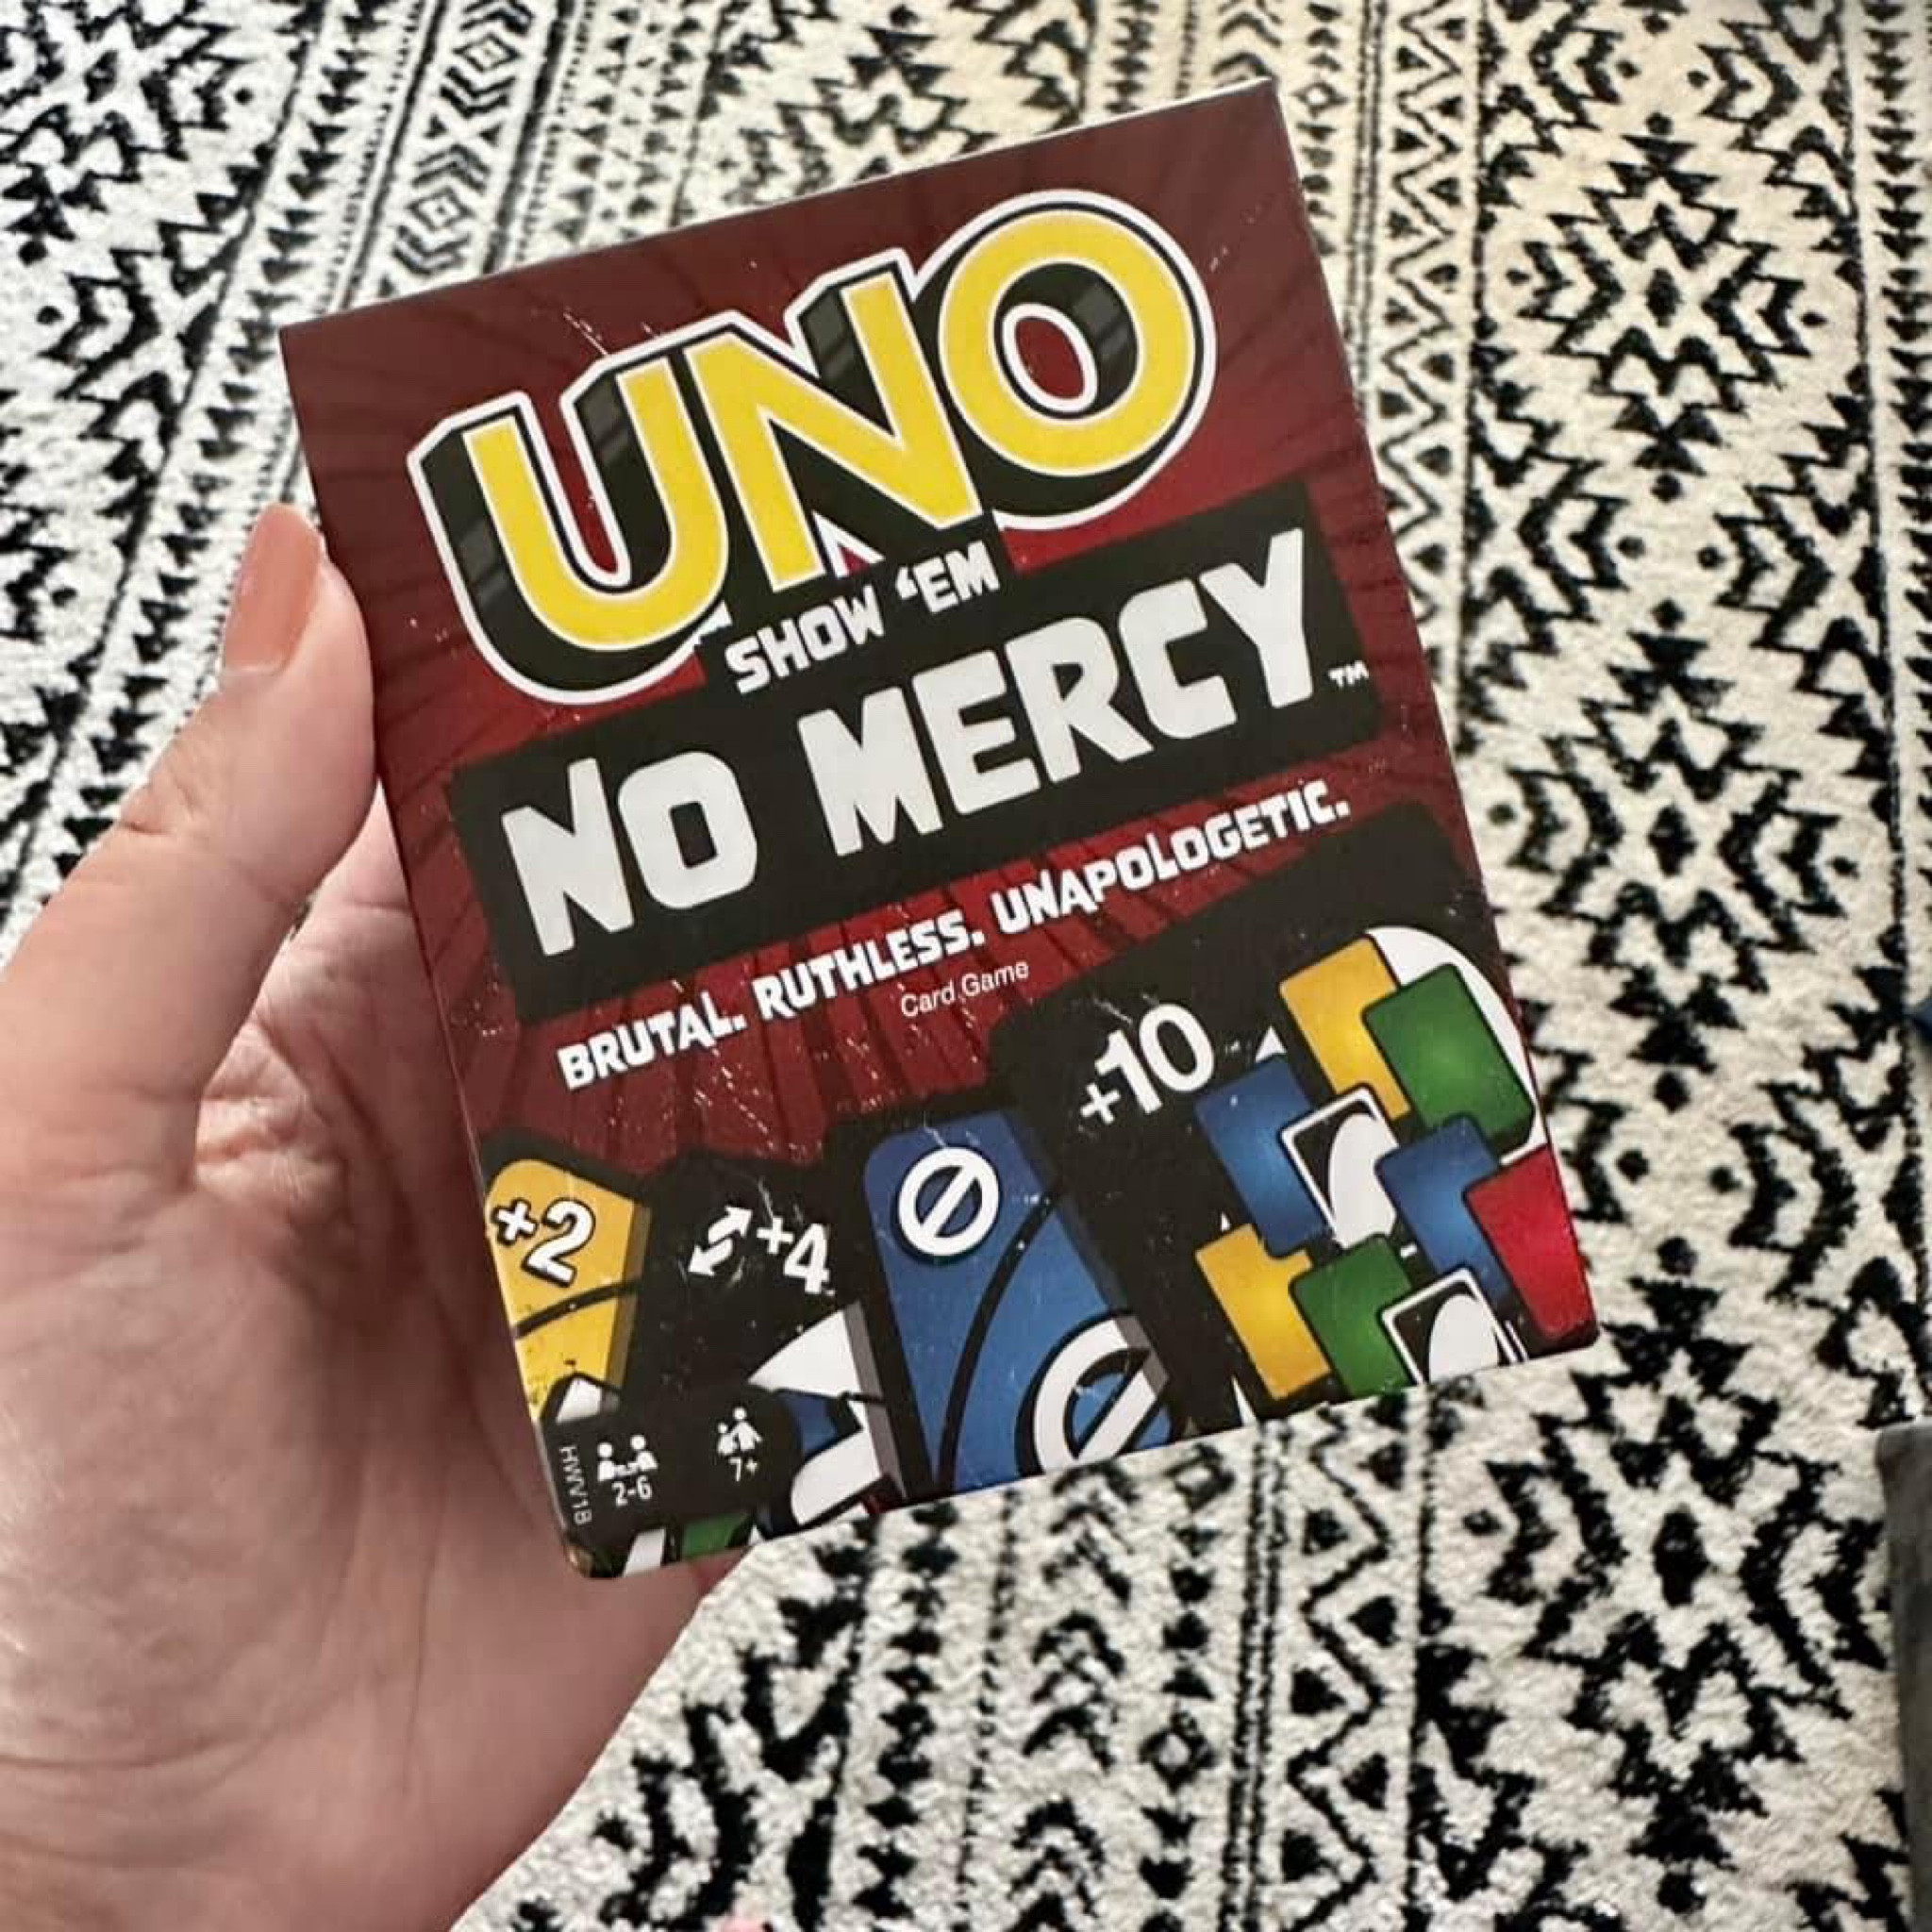 UNO Show 'Em NO MERCY Brutal, Ruthless, Unapologetic, Card Game